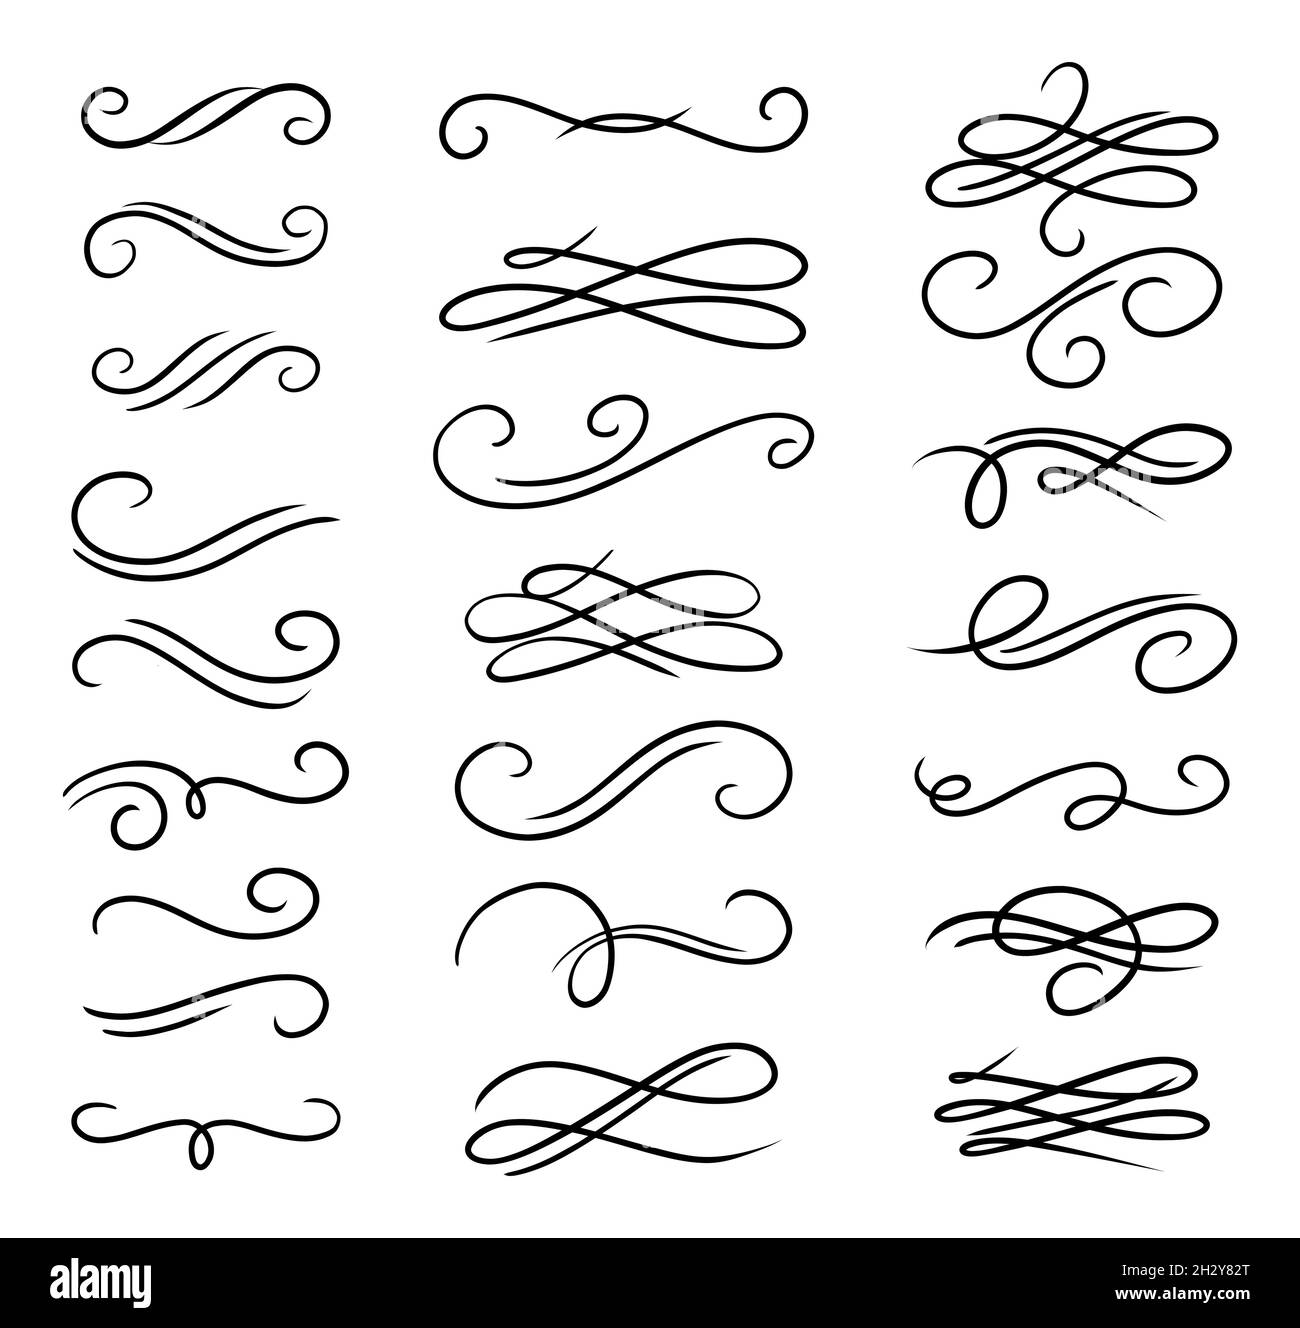 Calligraphy swirl ornament. Vintage and filigree dividers. Vector swirly ornate elements Stock Vector